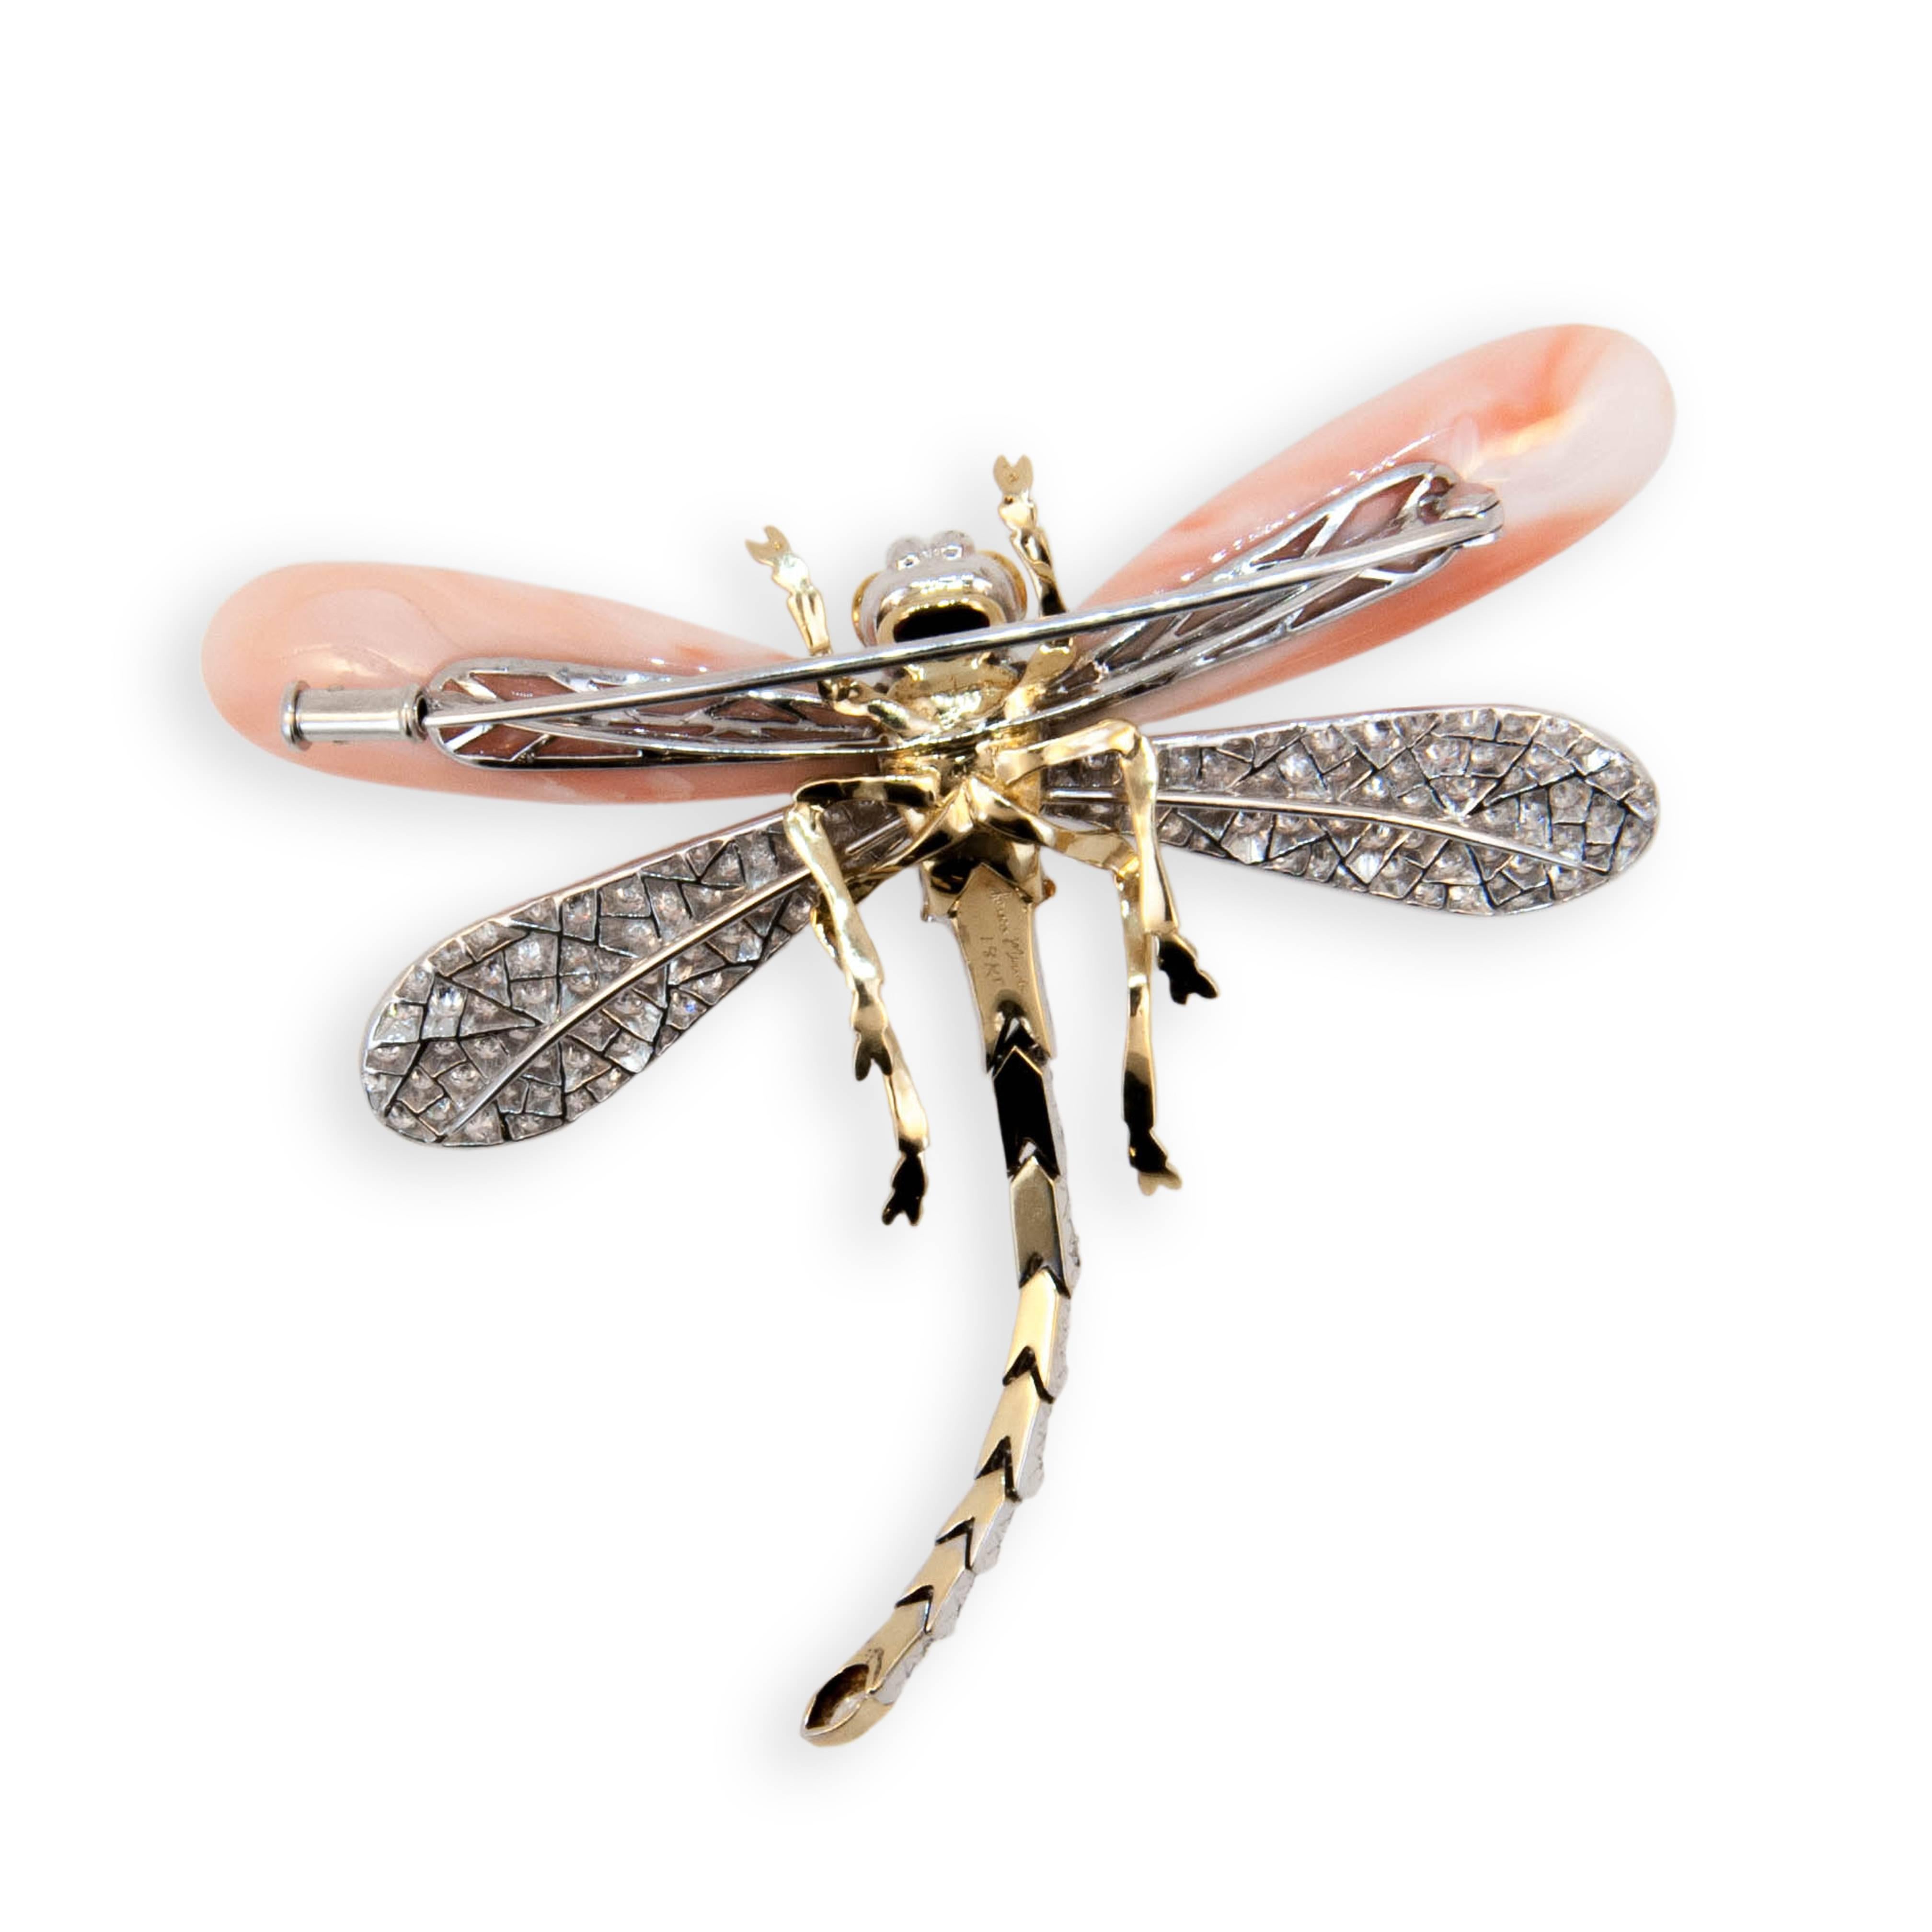 18 karat yellow and white gold Dragonfly brooch set with (2) approx. 6.80 gram total weight. Angel Skin Coral drops for front wings,back wings,body and tail set with 199 round Diamonds 2.38 carats total weight. Tip of tail is set with (1) Marquise